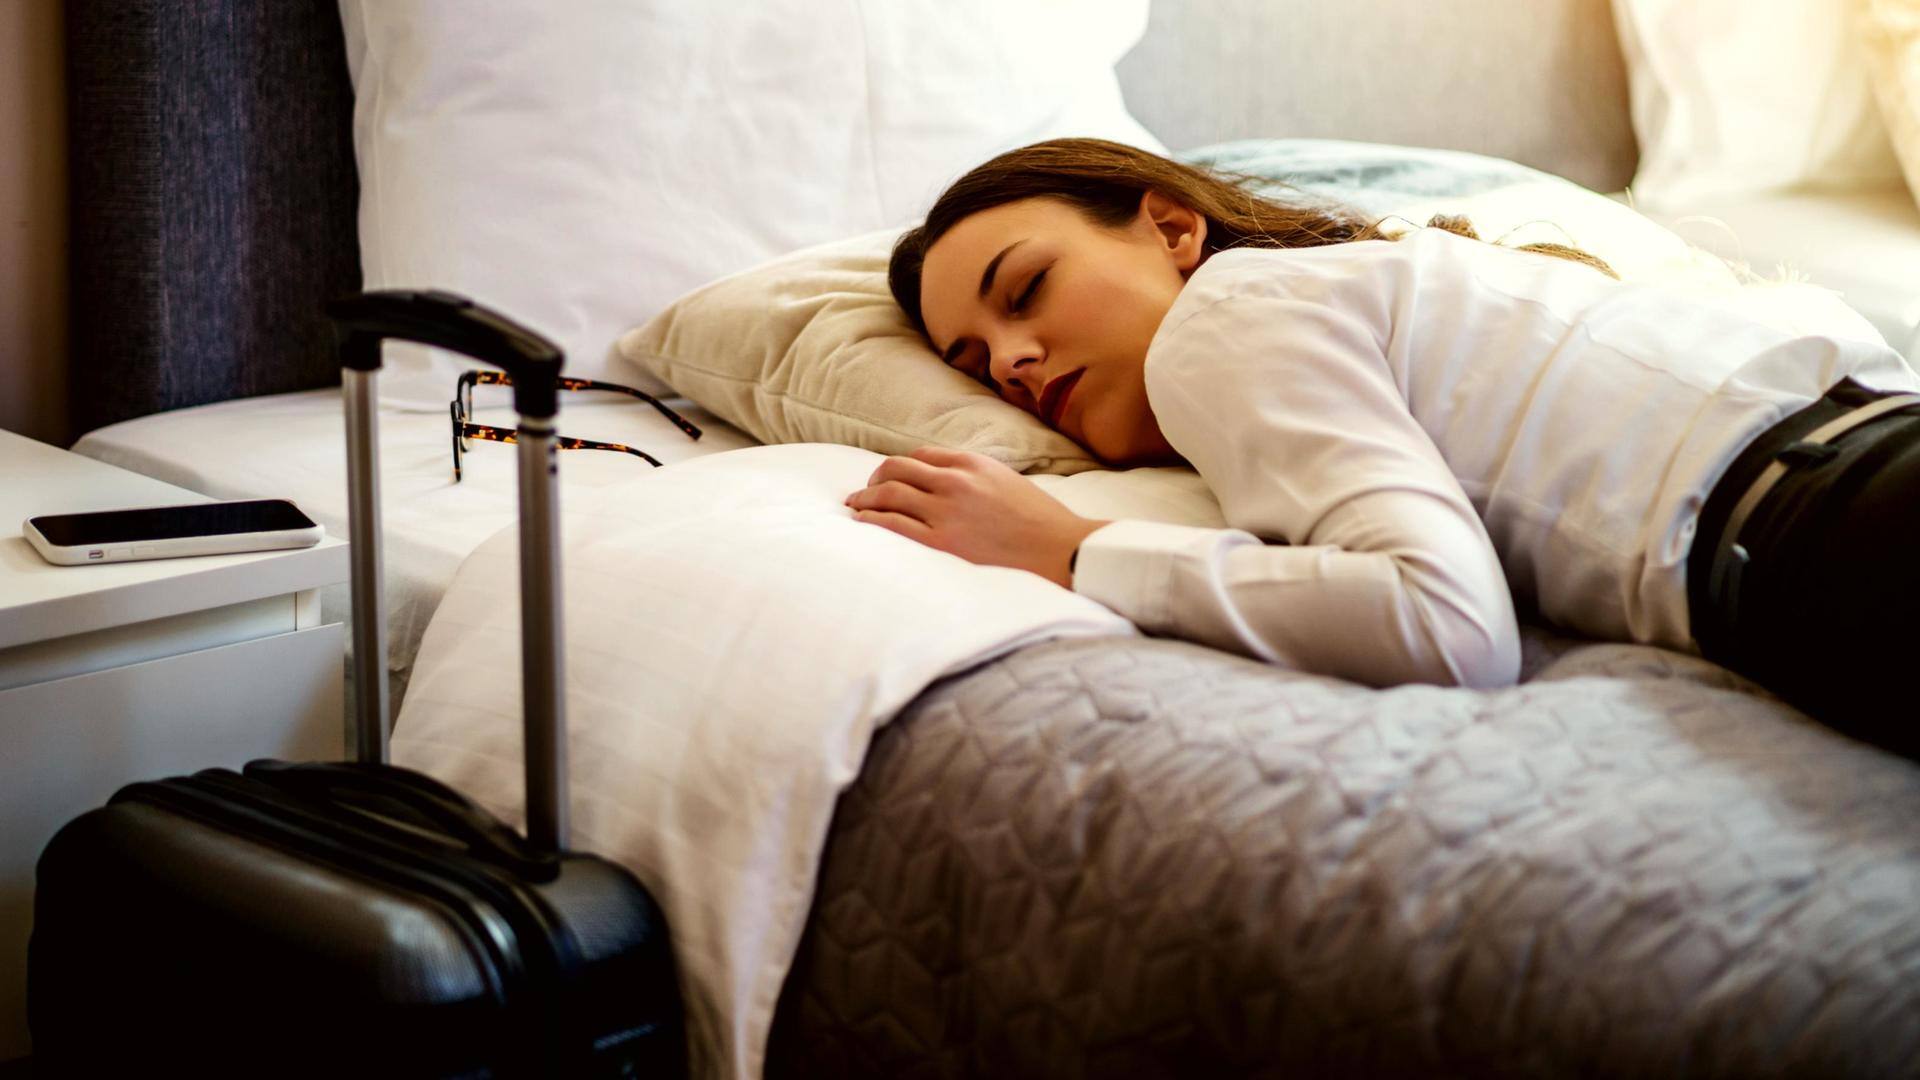 Sleep tourism: The latest trend travelers are 'waking up' to